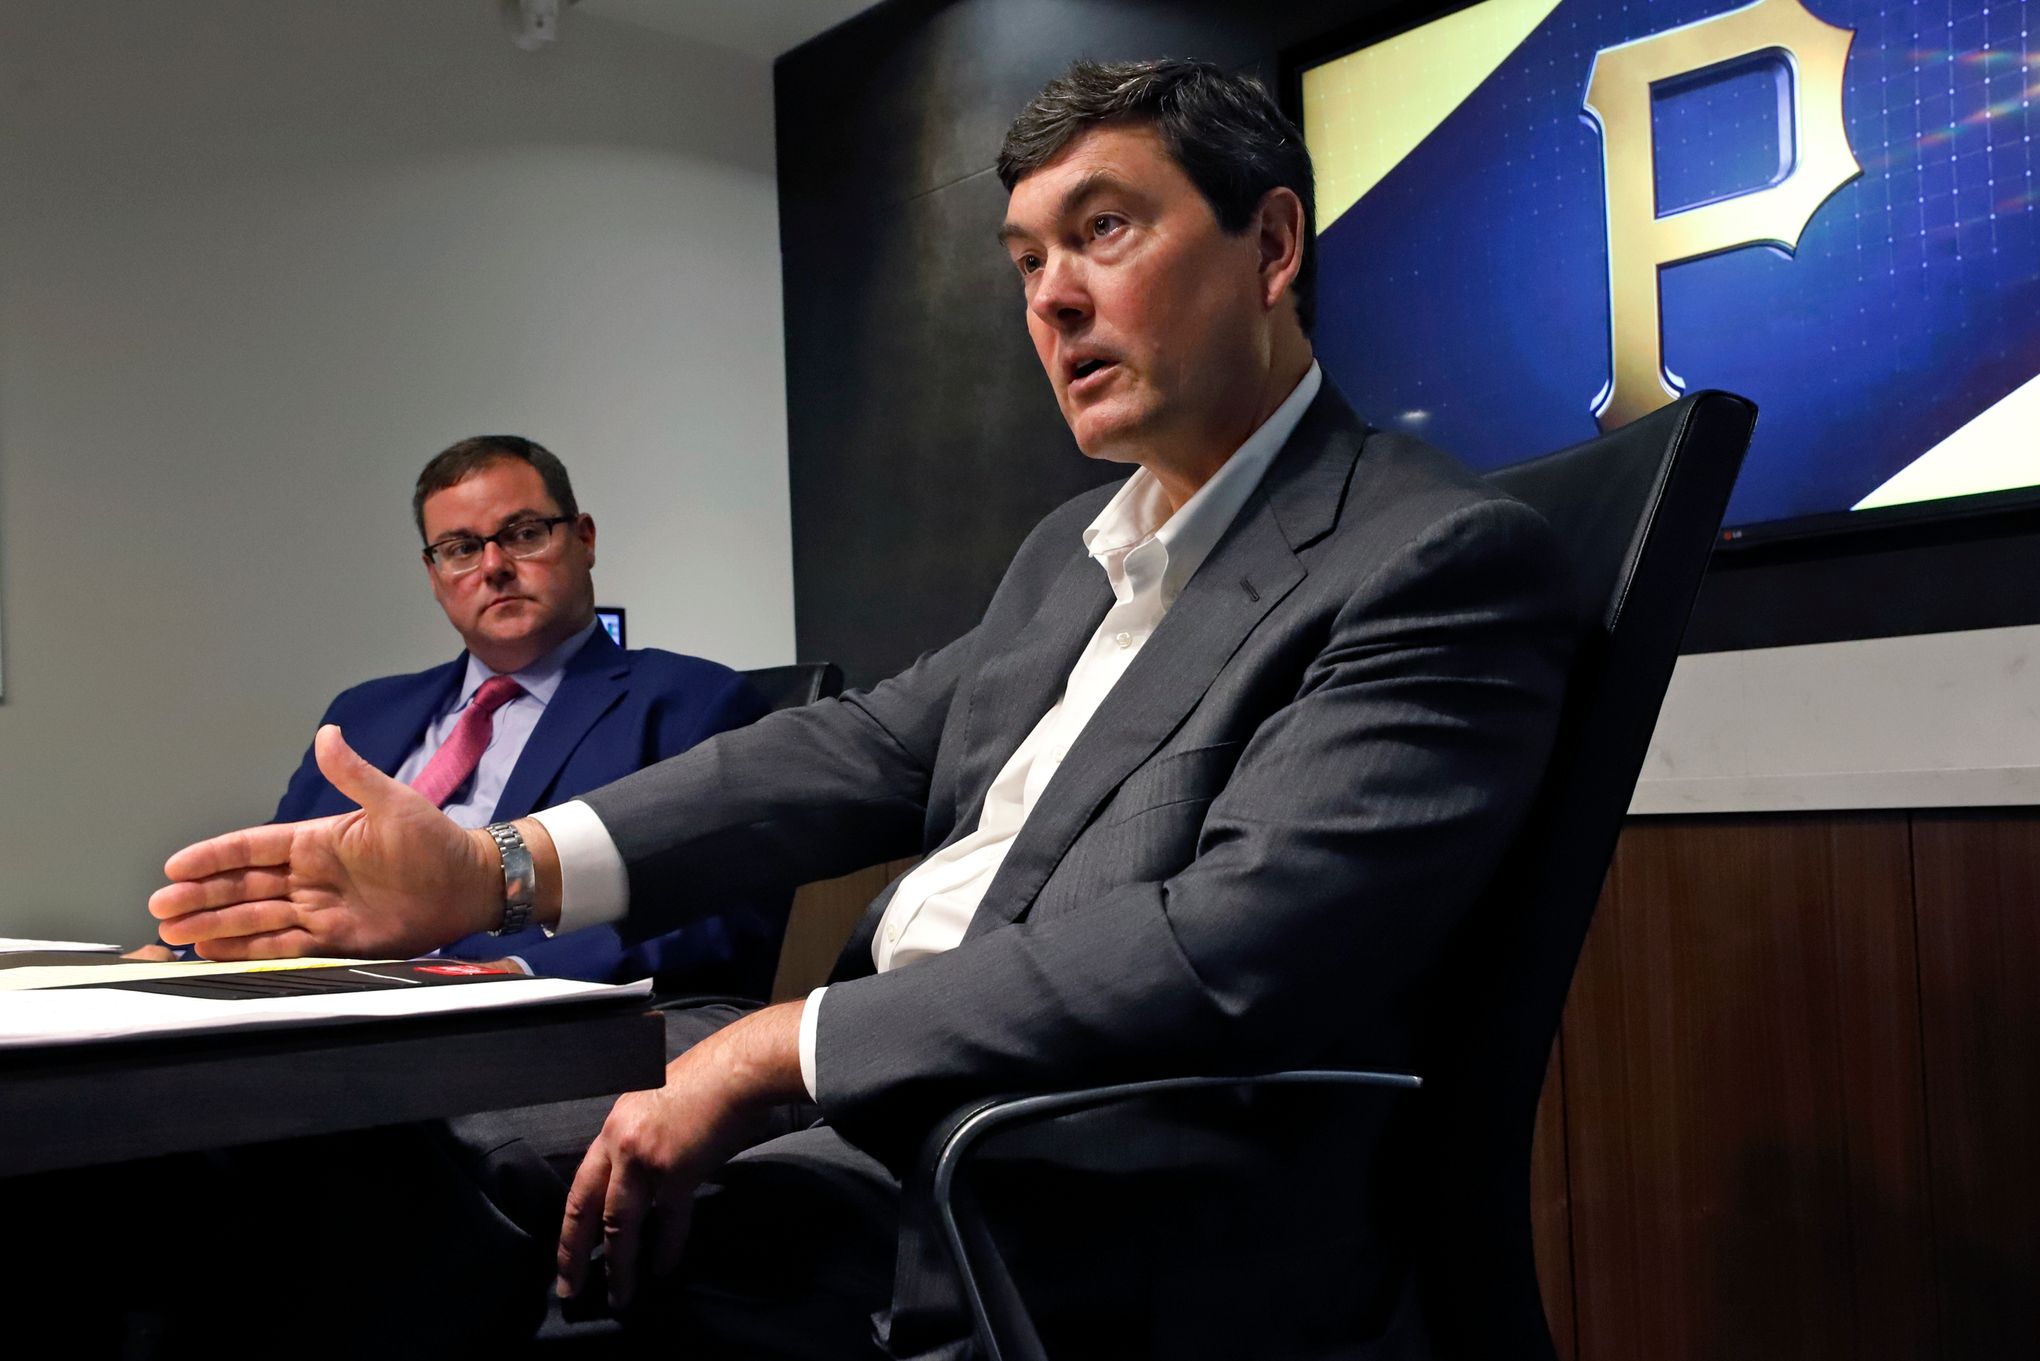 Pirates Fan Forum: Bob Nutting is cheap, but it's the GM not